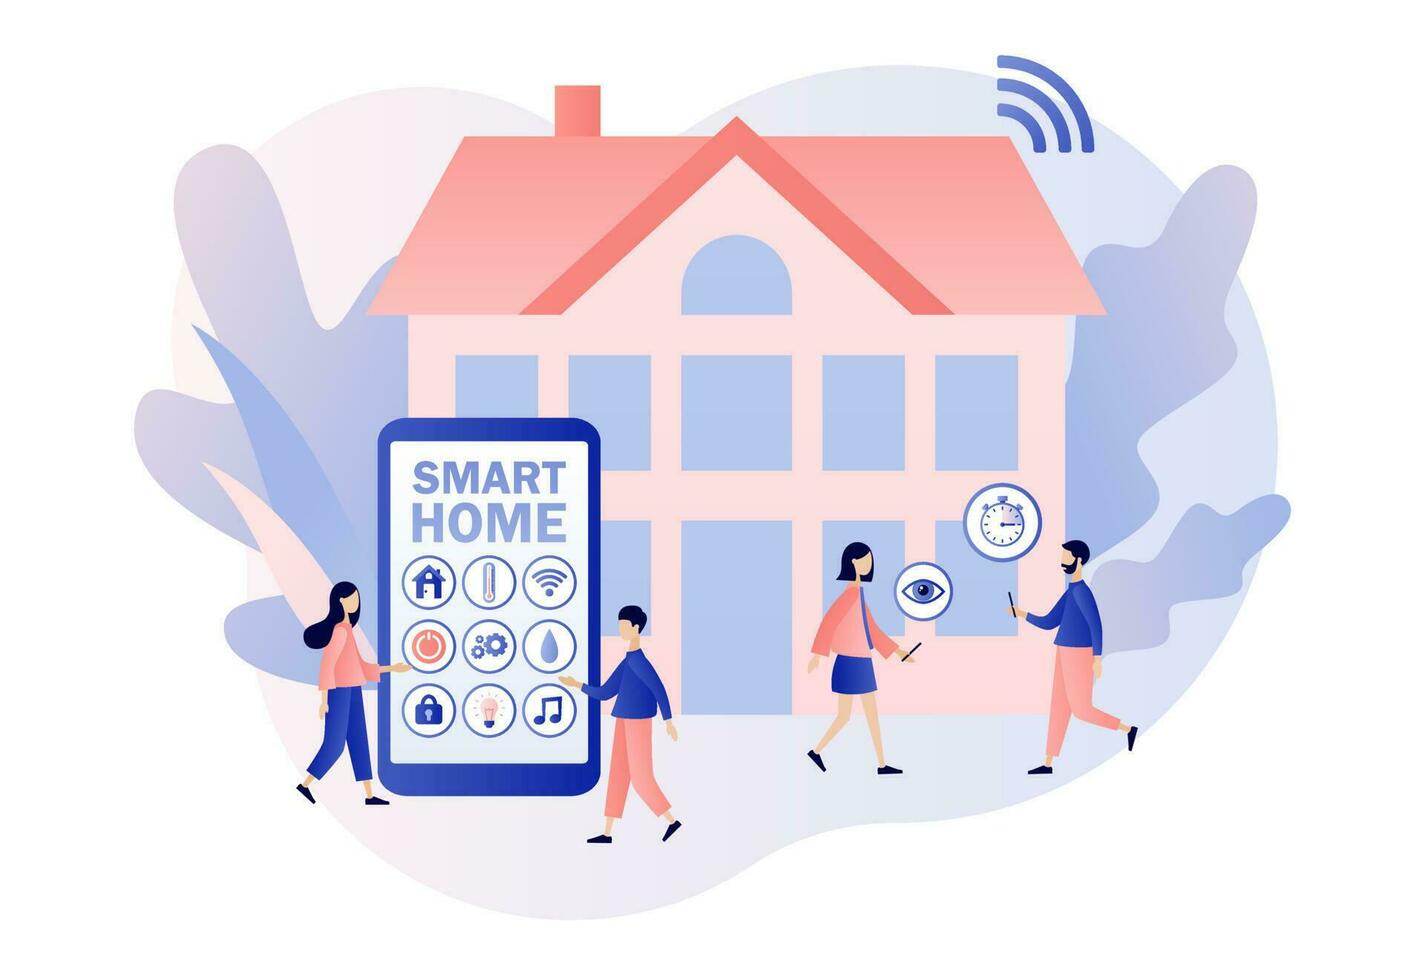 Smart home. Tiny people control of lighting, heating, ventilation and air conditioning, security and video surveillance with smartphone app. Modern flat cartoon style. Vector illustration